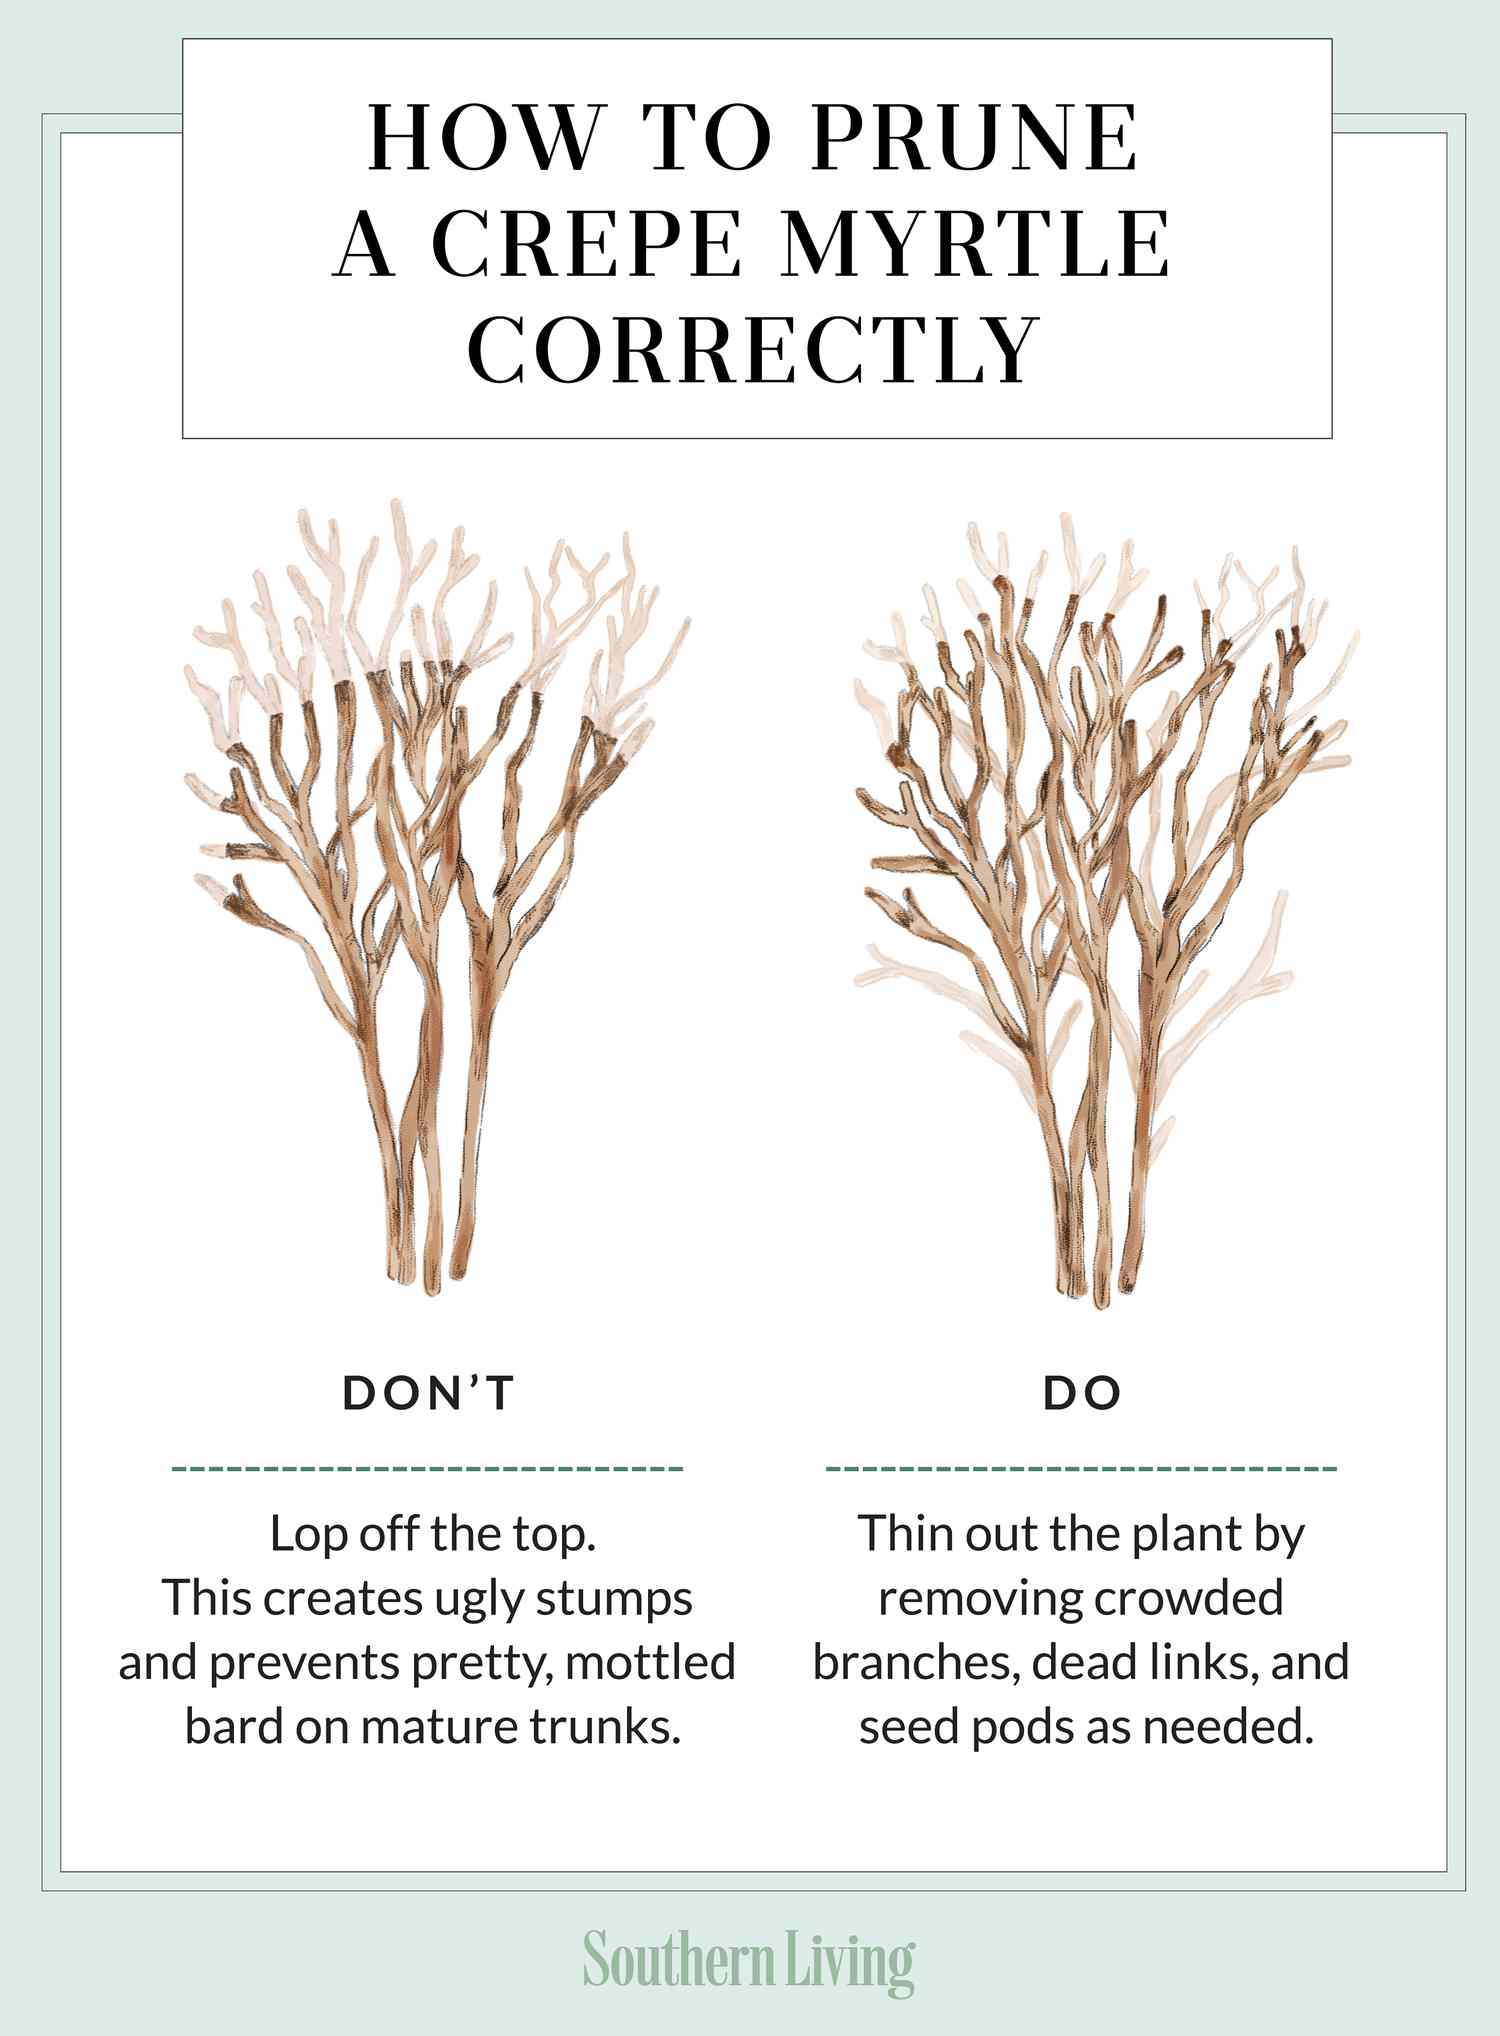 Pruning Techniques for Crape Myrtles